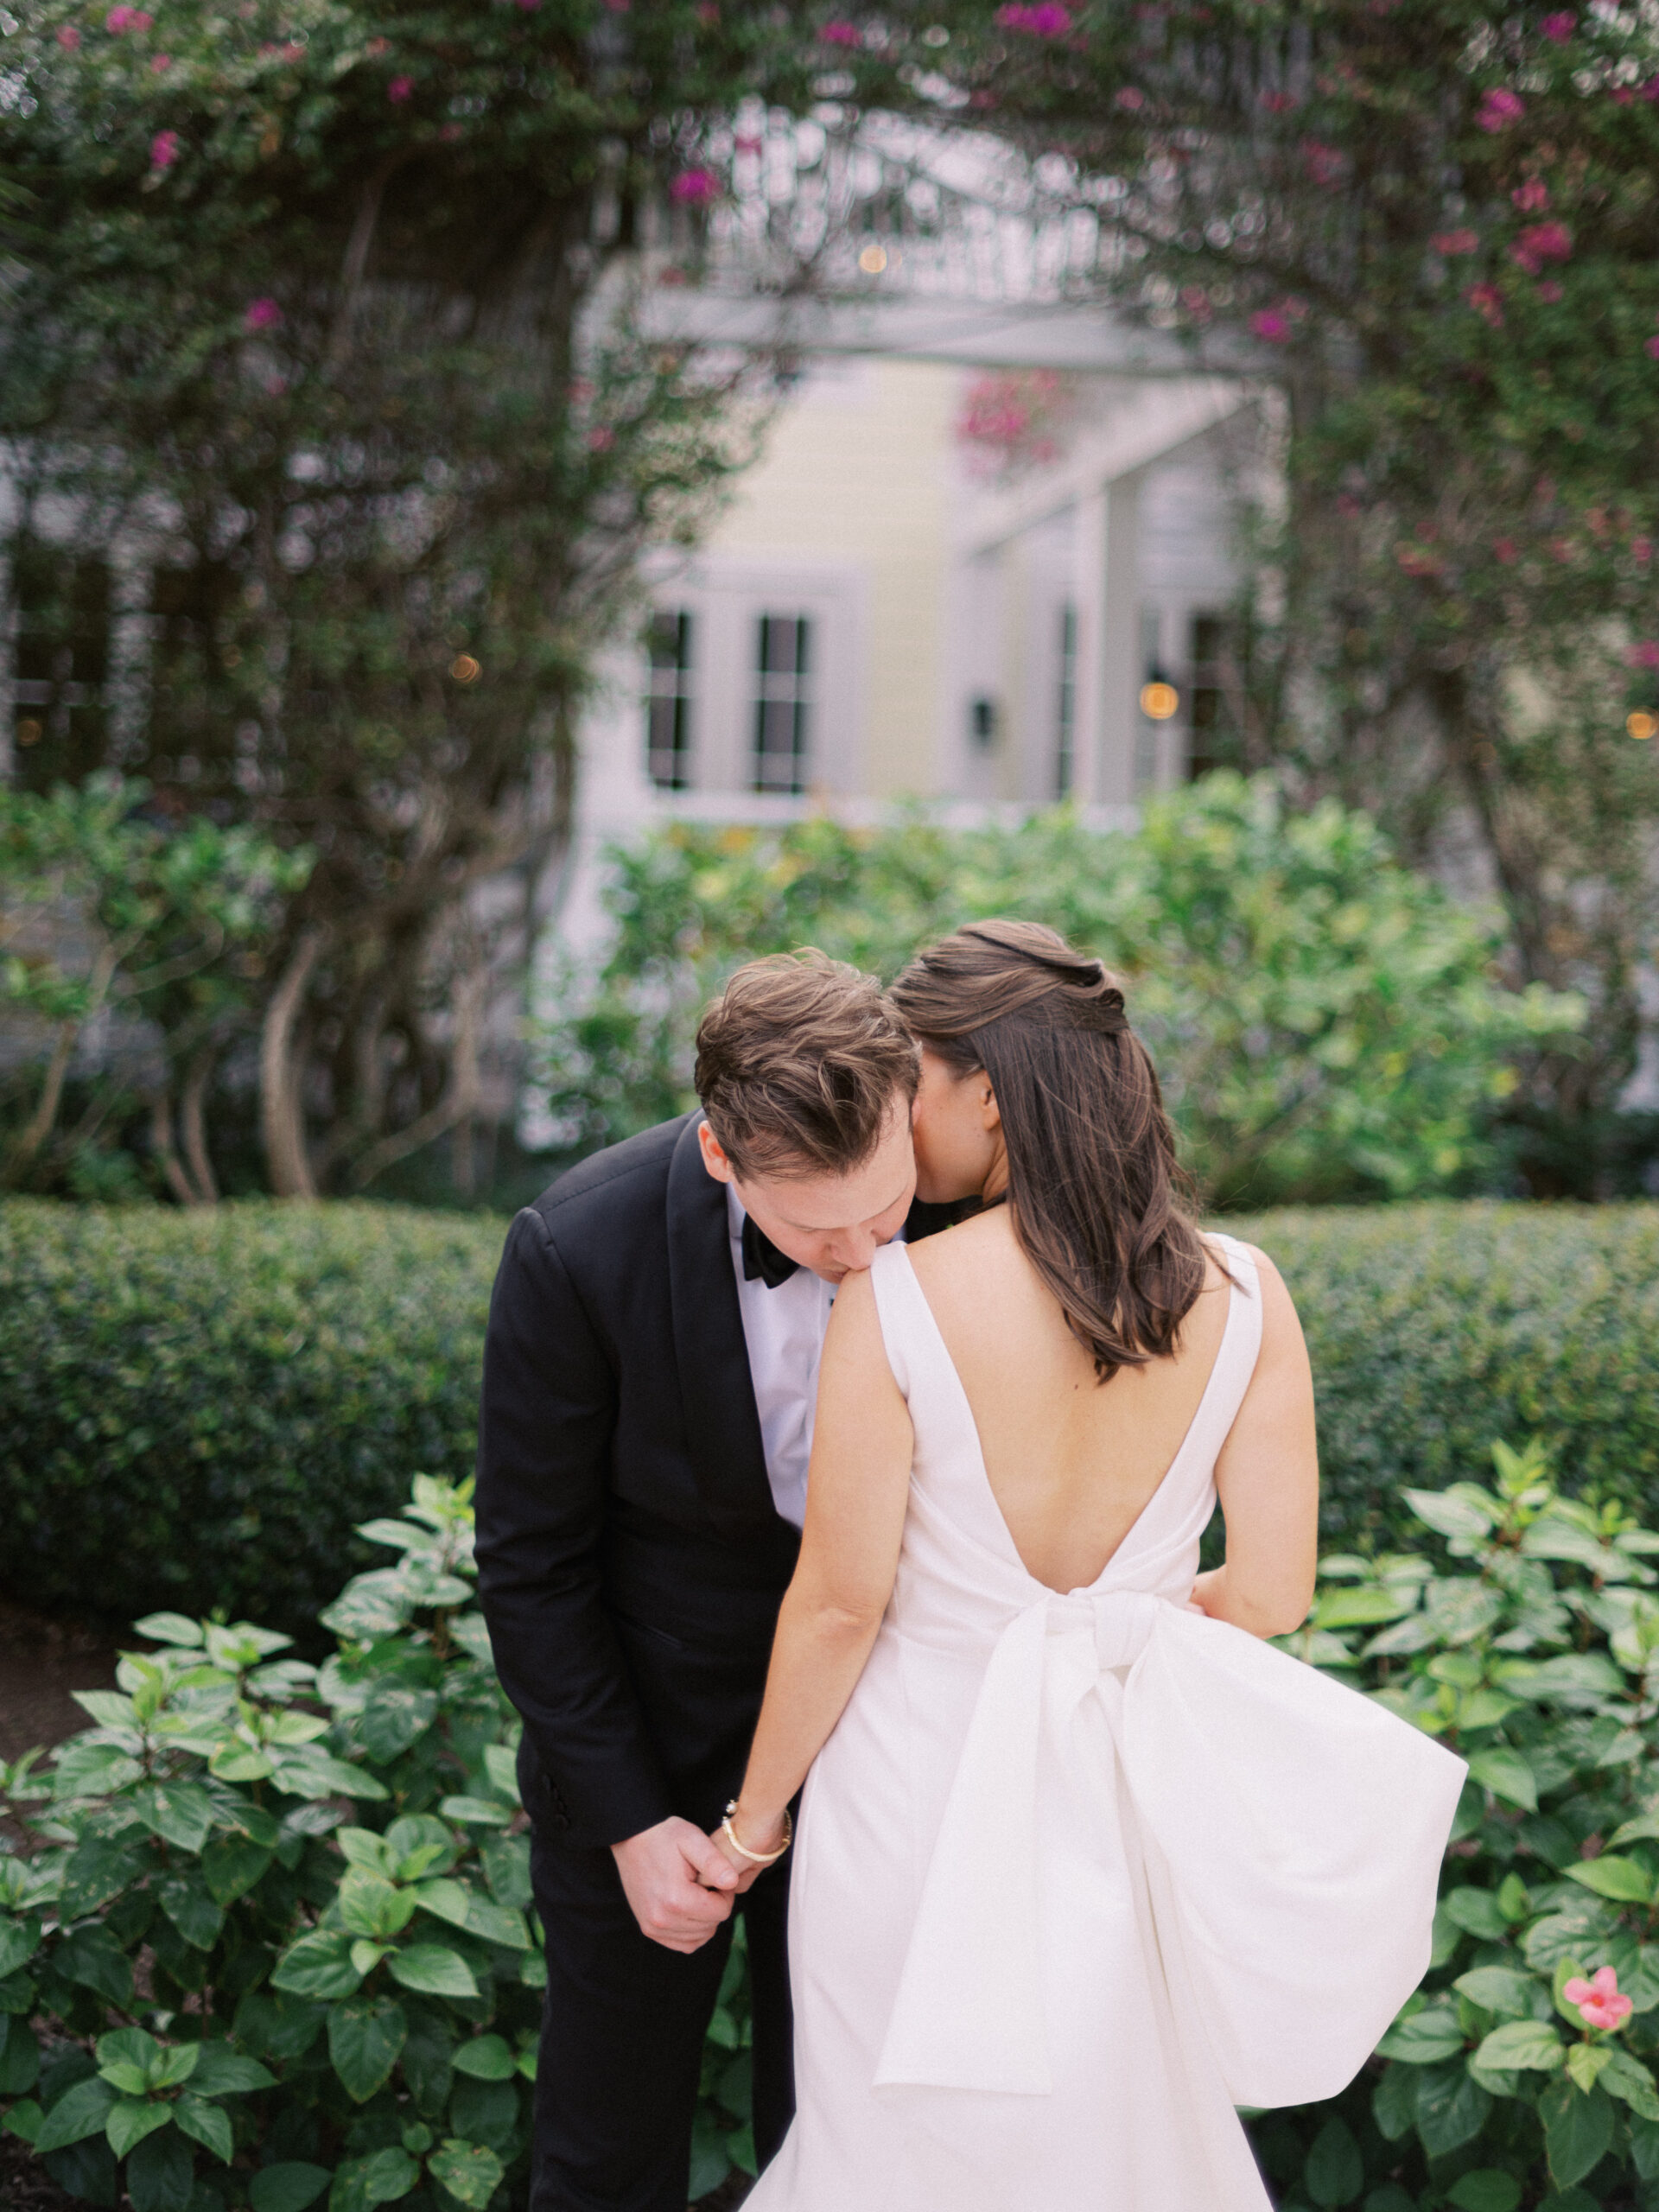 Dreamy Brooklyn Wedding with Flowing Flowers and Hints of Citrus